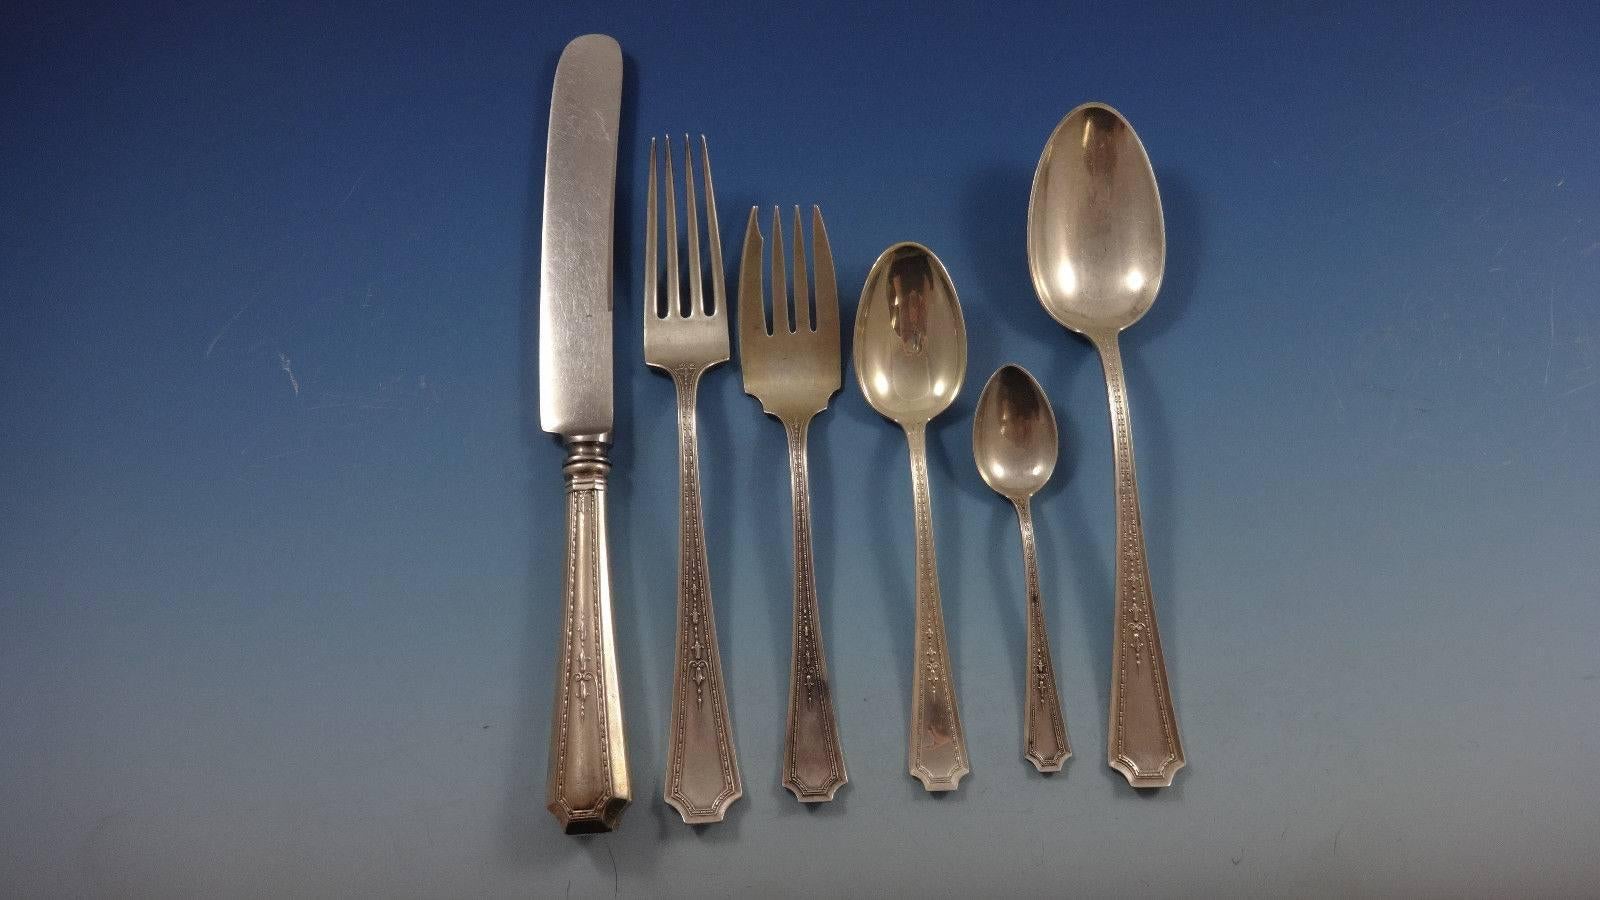 Colfax by Durgin sterling silver flatware set of 47 pieces. No monograms! Scarce pattern. Great starter set! This set includes:

Six knives, 9